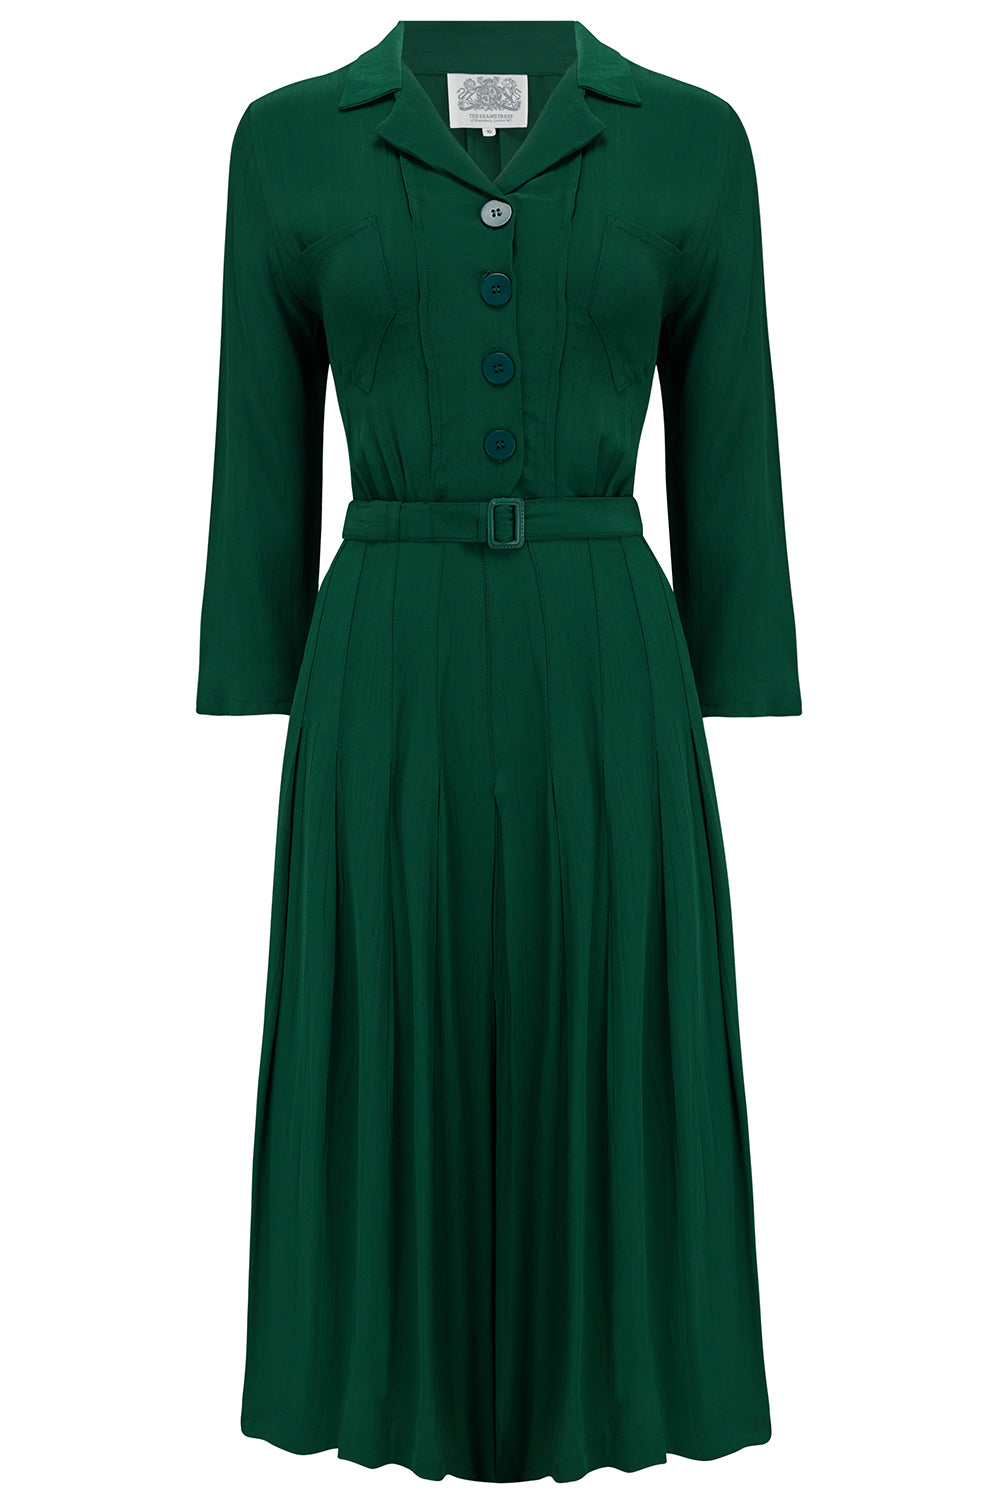 Lucille shirt dress CC41 in Hampton Green , Classic 1940s True Vintage Style - True and authentic vintage style clothing, inspired by the Classic styles of CC41 , WW2 and the fun 1950s RocknRoll era, for everyday wear plus events like Goodwood Revival, Twinwood Festival and Viva Las Vegas Rockabilly Weekend Rock n Romance The Seamstress of Bloomsbury